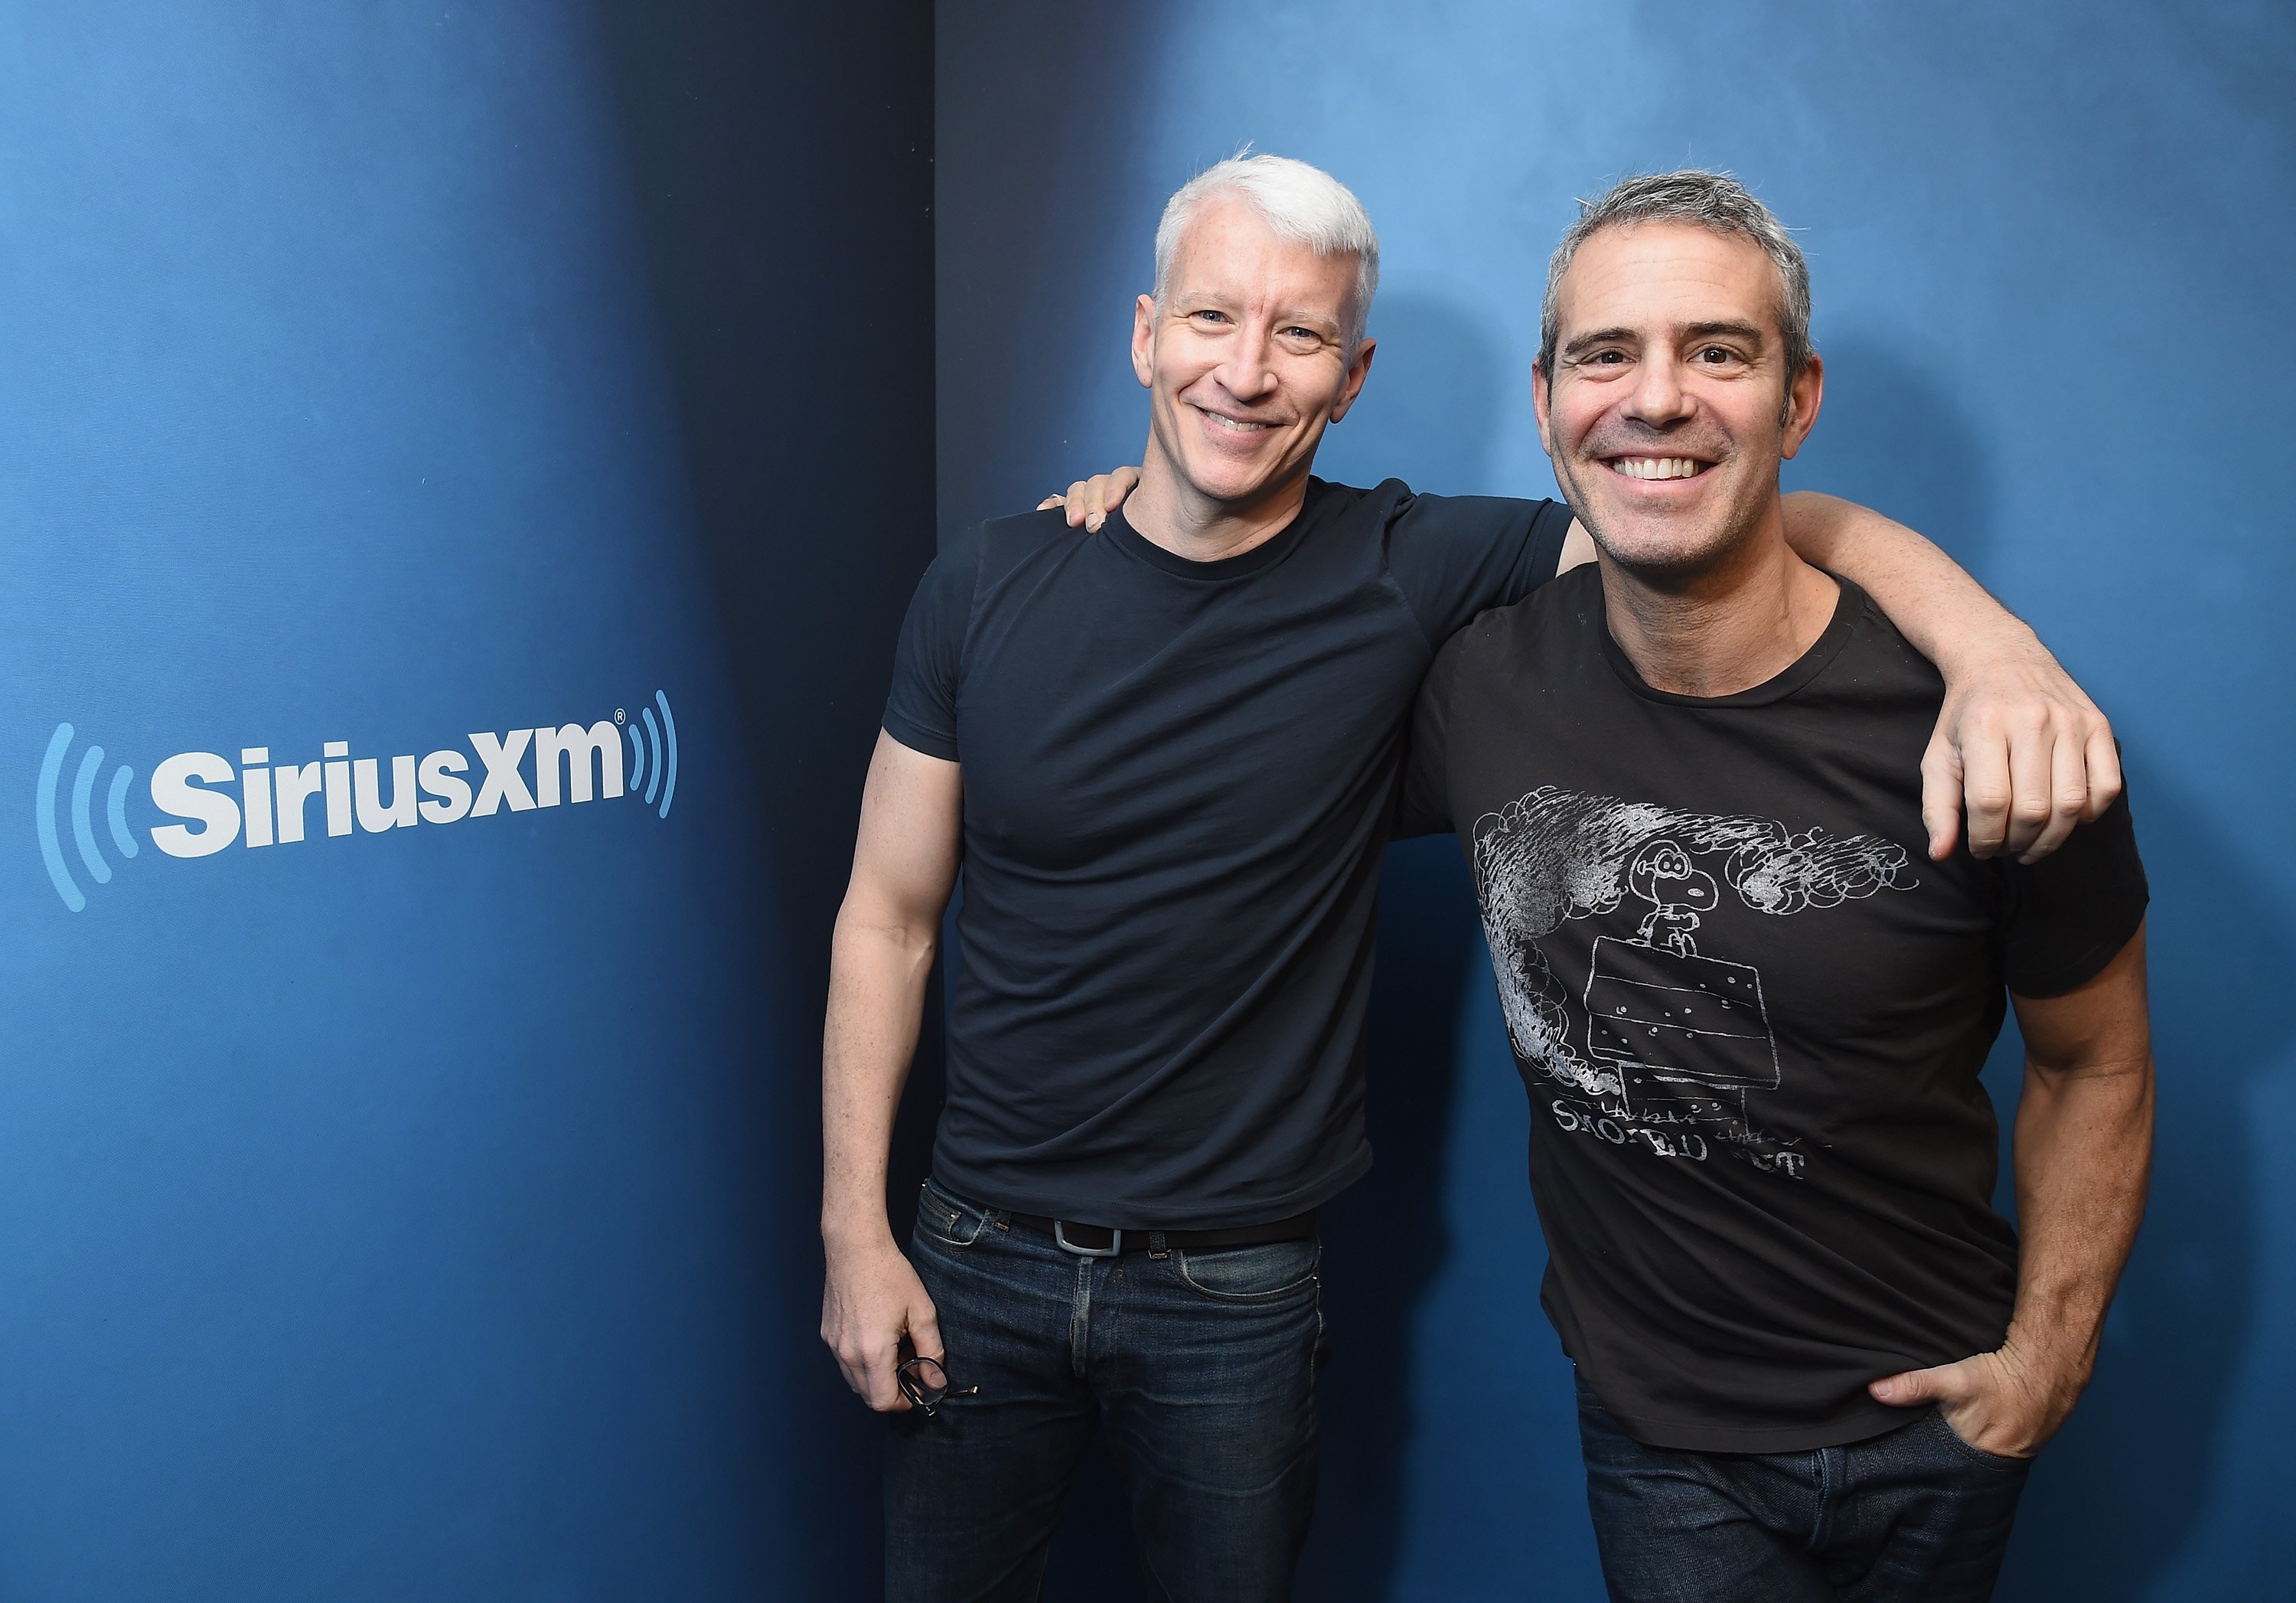 Anderson Cooper and host Andy Cohen at SiriusXM Studios on January 13, 2017 | Photo: GettyImages